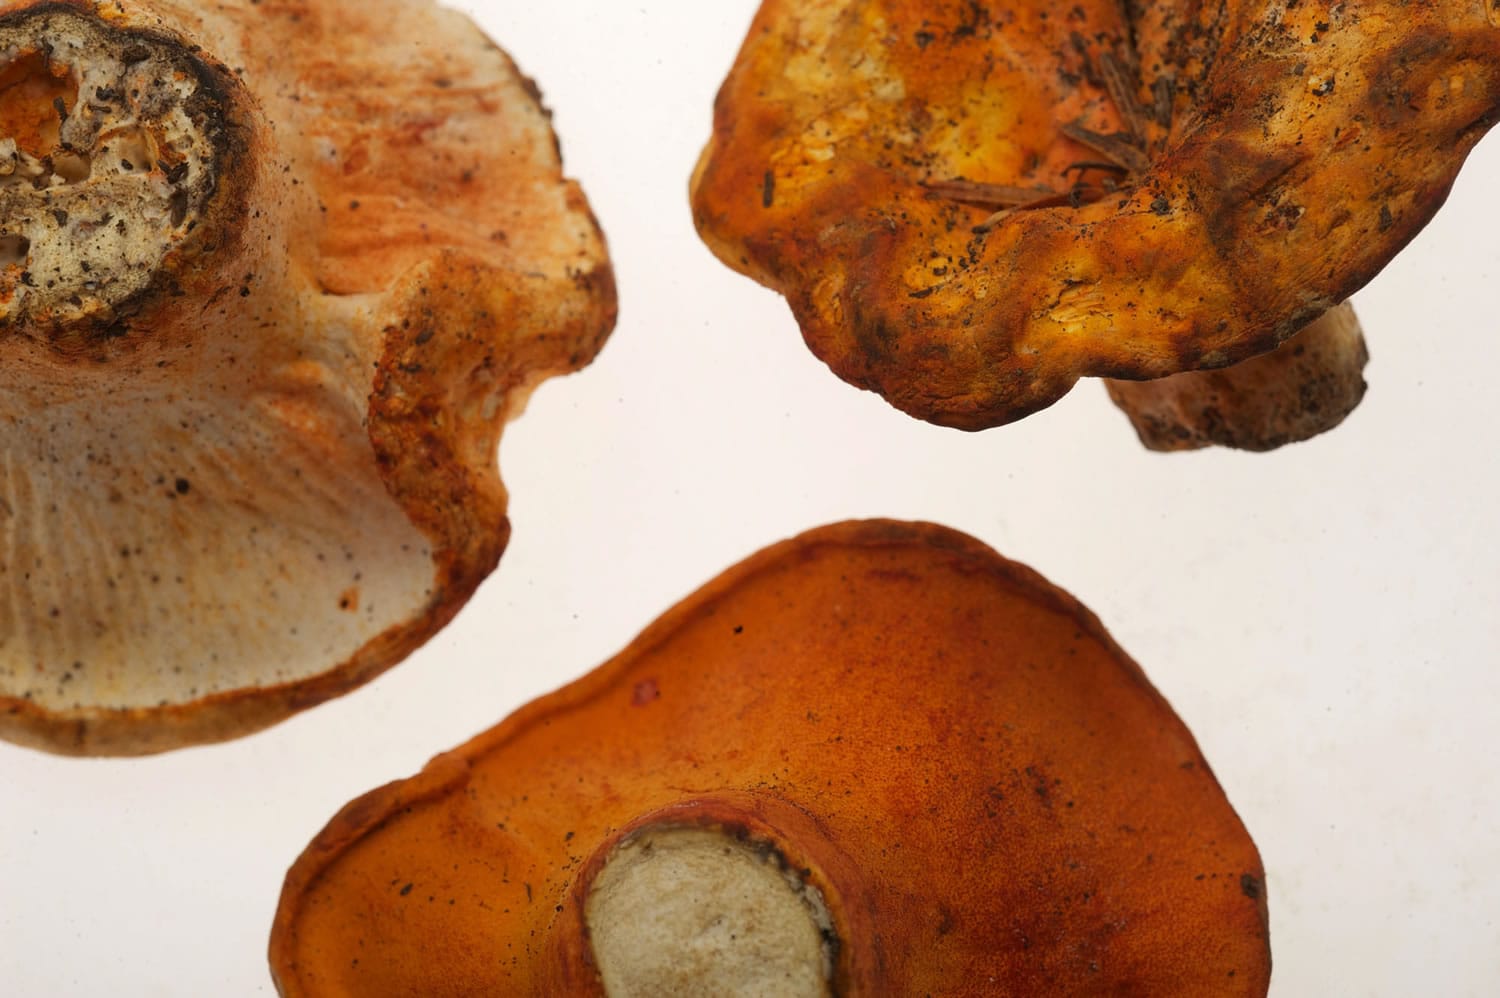 Unusual mushrooms are among the out-of-the-ordinary foods offered at the Vancouver Farmers Market.